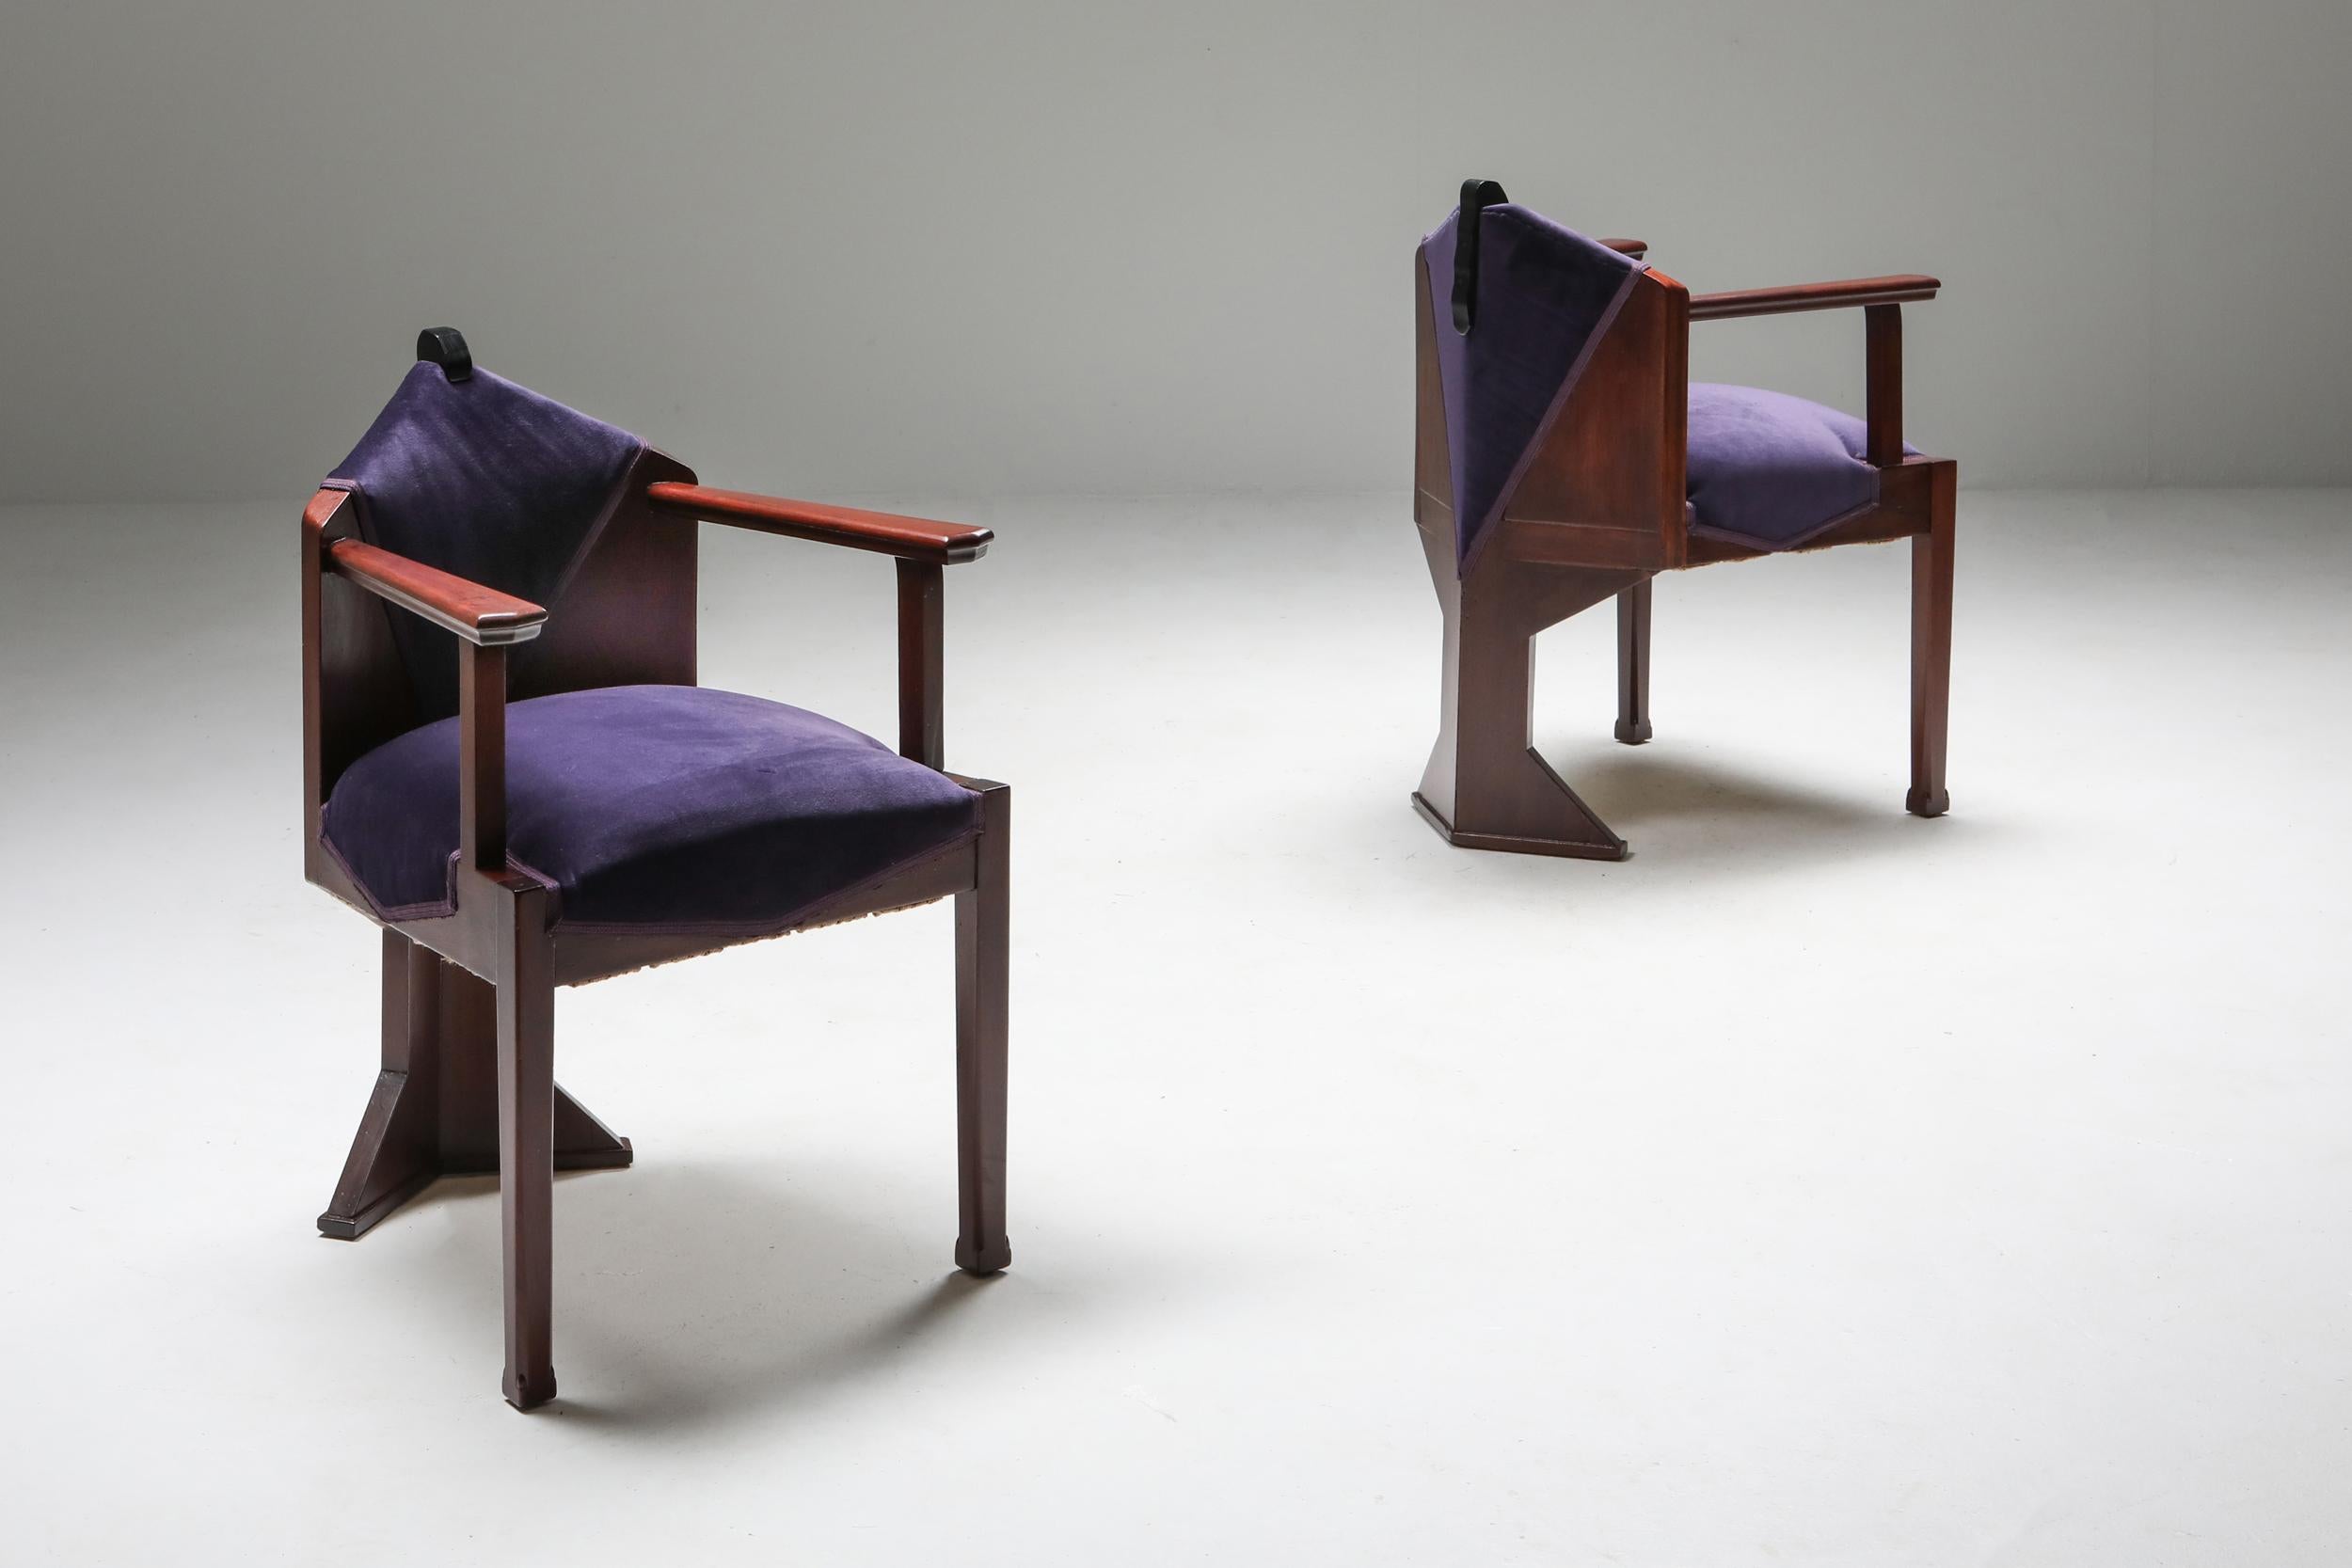 Amsterdamse School pair of armchairs attributed to Michel de Klerk.
Atelier Speelman pair of easy chairs, solid mahogany and ebony frame, purple velvet upholstery. Unusual high end pieces which are very rare to source.

 